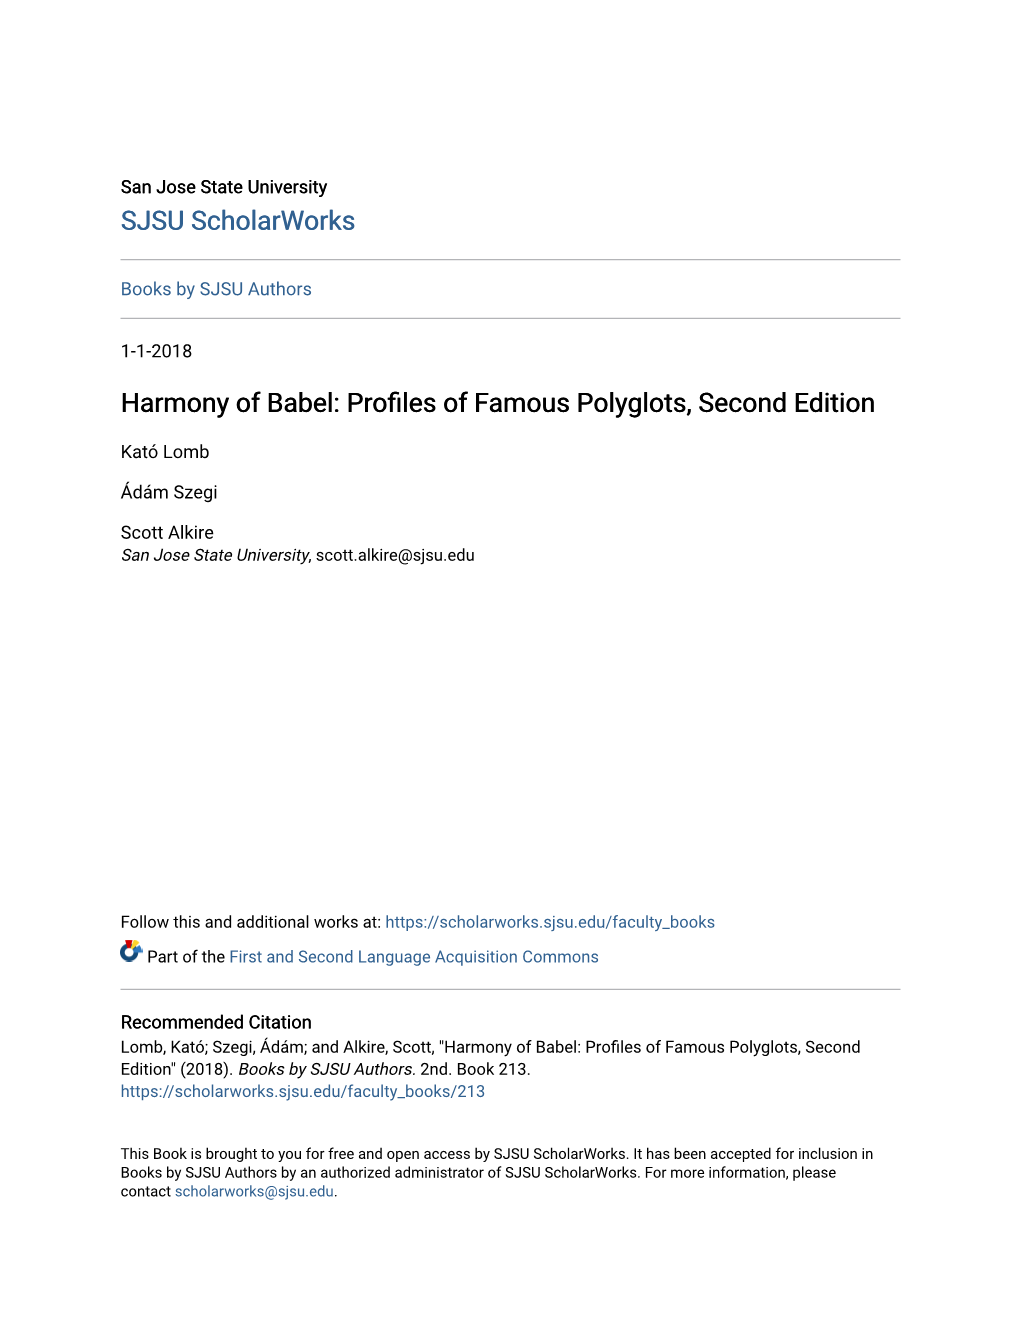 Harmony of Babel: Profiles of Famous Polyglots, Second Edition